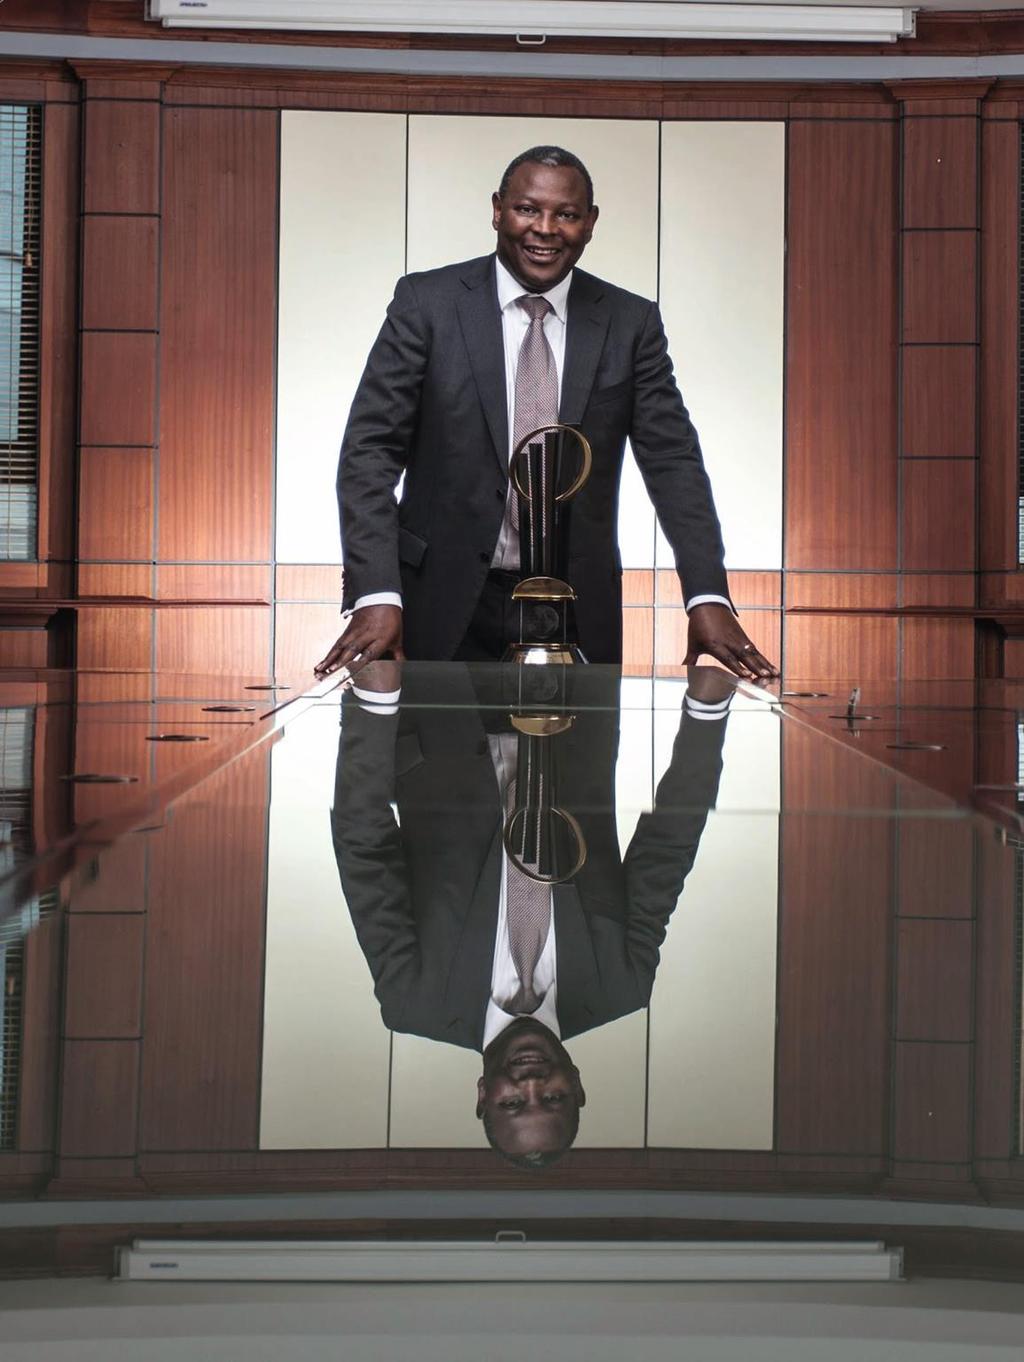 JAMES MWANGI, Group MD & Group CEO, Equity Group Holdings Ltd Forbes Africa Print Rate Card (ZAR)* Number of Issues 1 3 6 12 Opening Double Page (DPS) 135,000 130,250 121,625 104,375 Outside Back